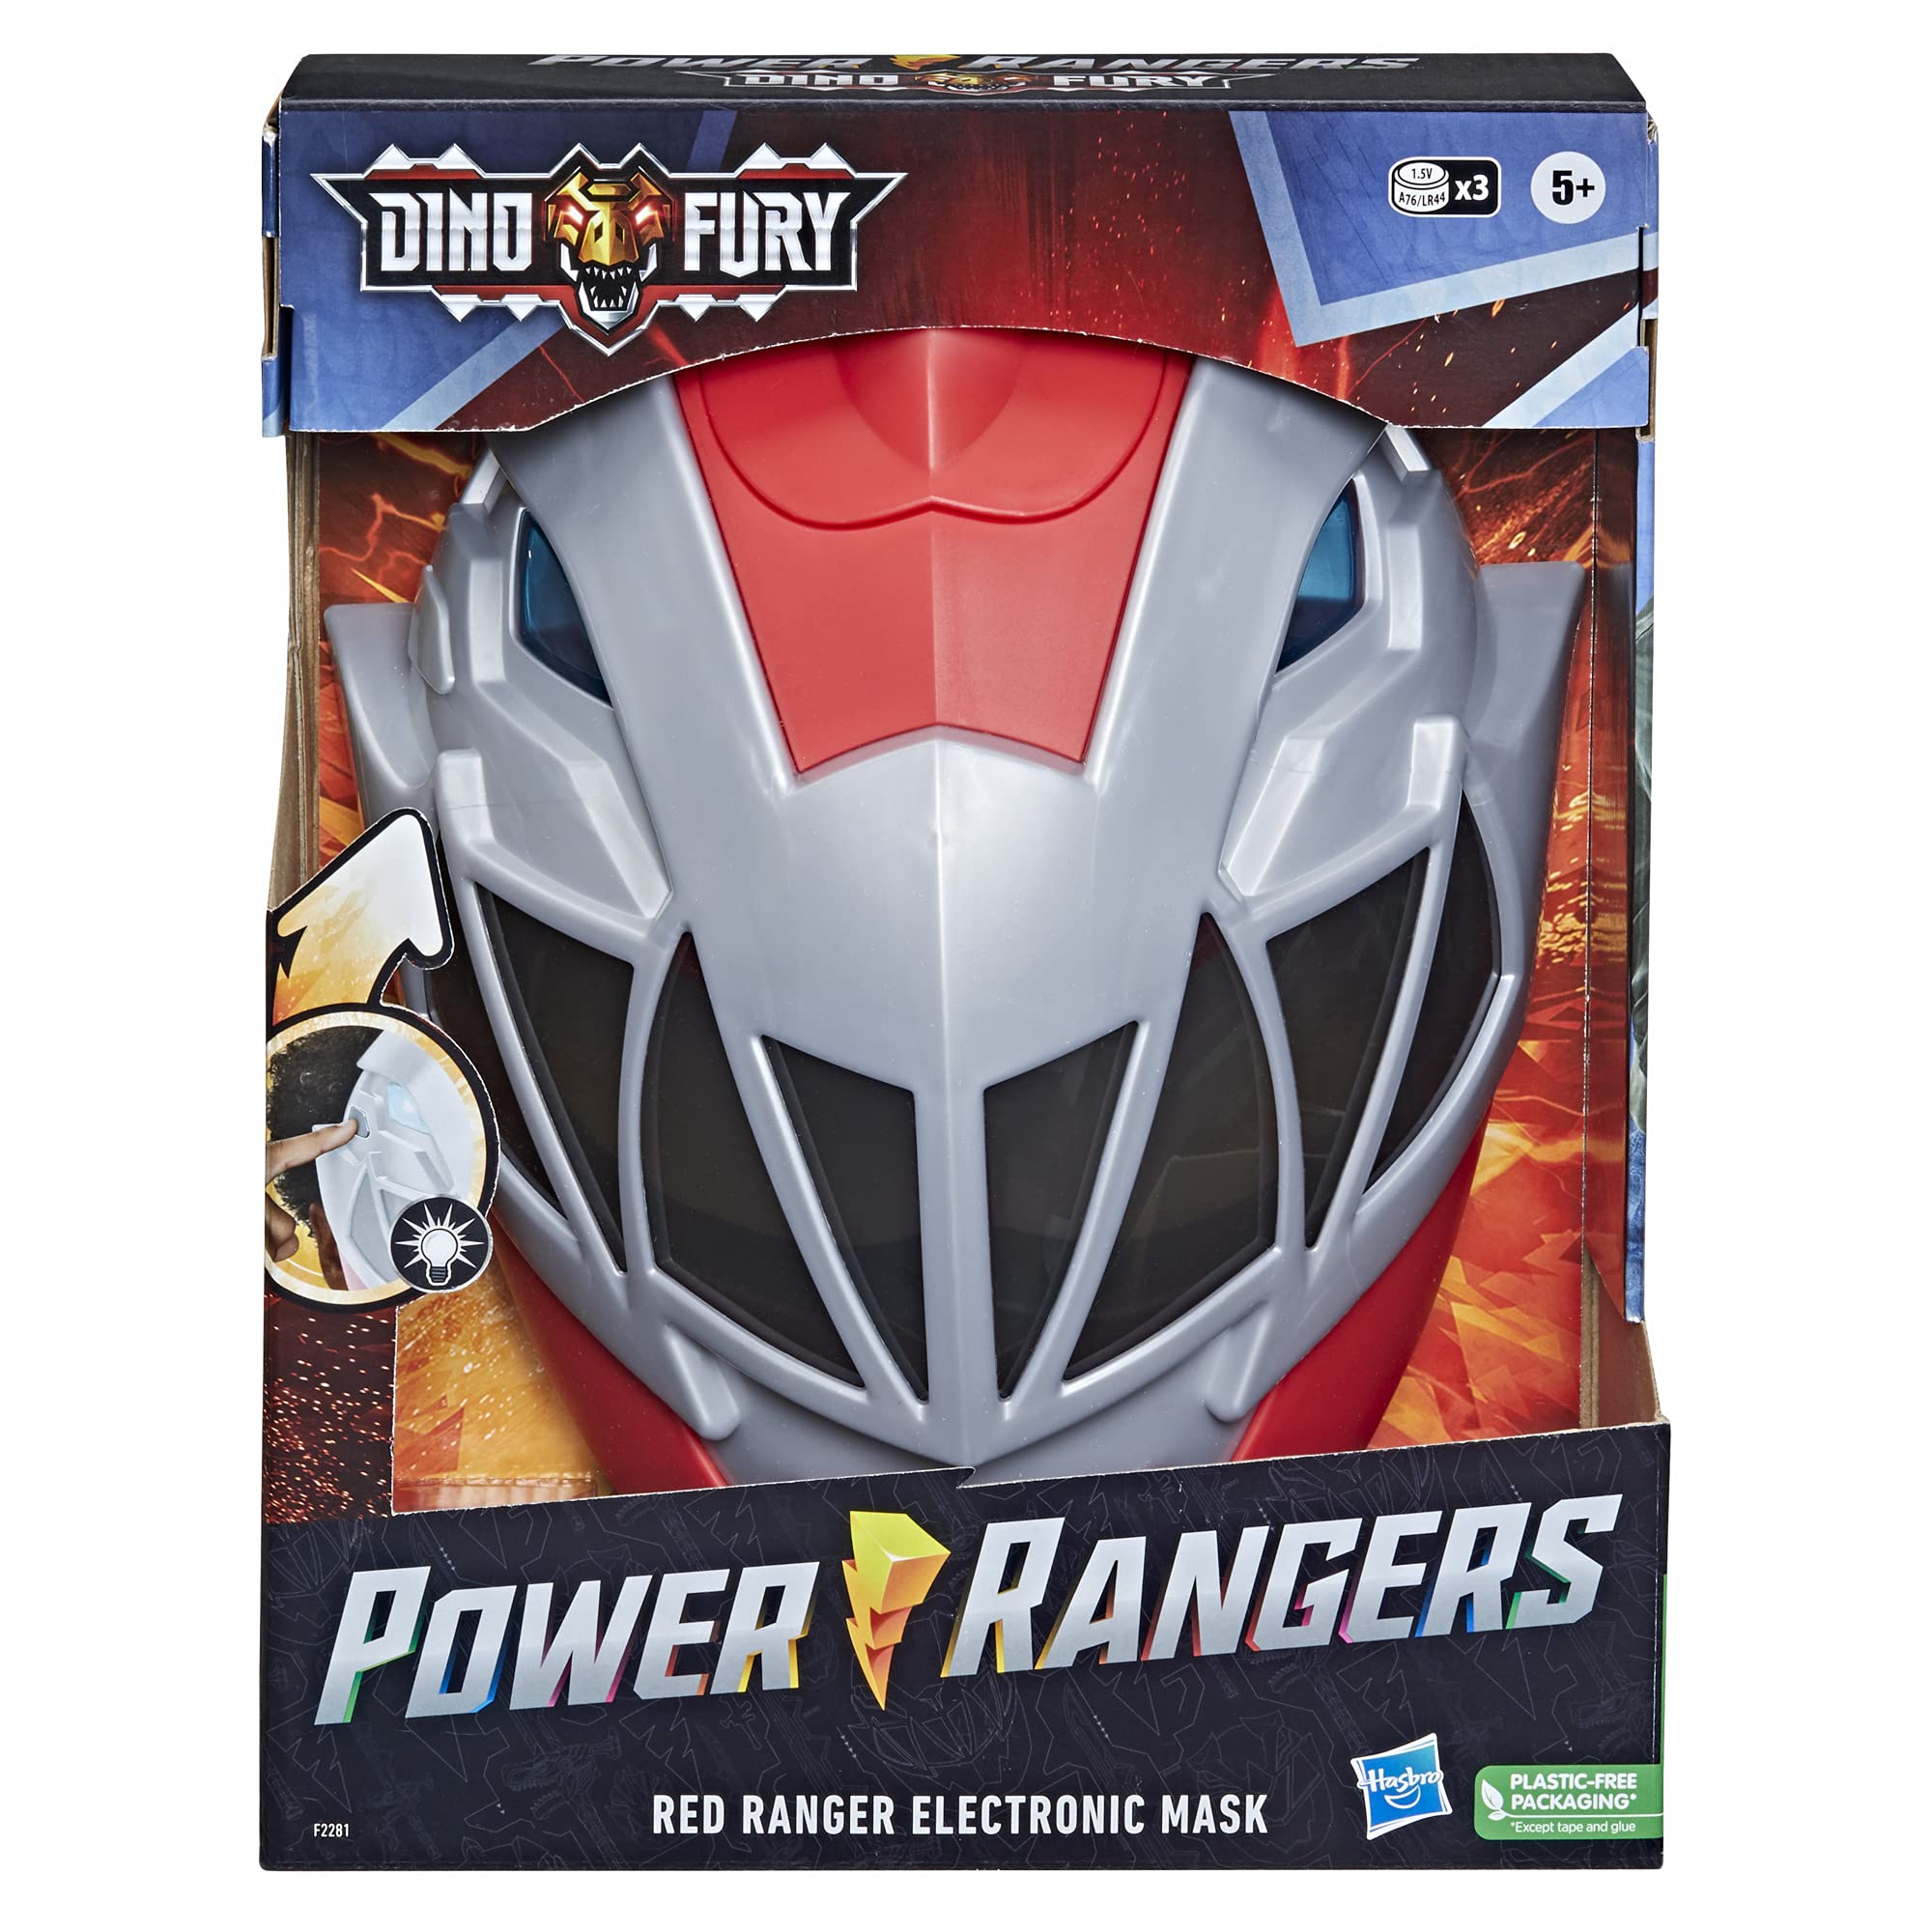 Power Rangers Dino Fury Red Ranger Electronic Mask Roleplay Toy for costume and Dress Up Inspired by The TV Show Ages 5 and Up